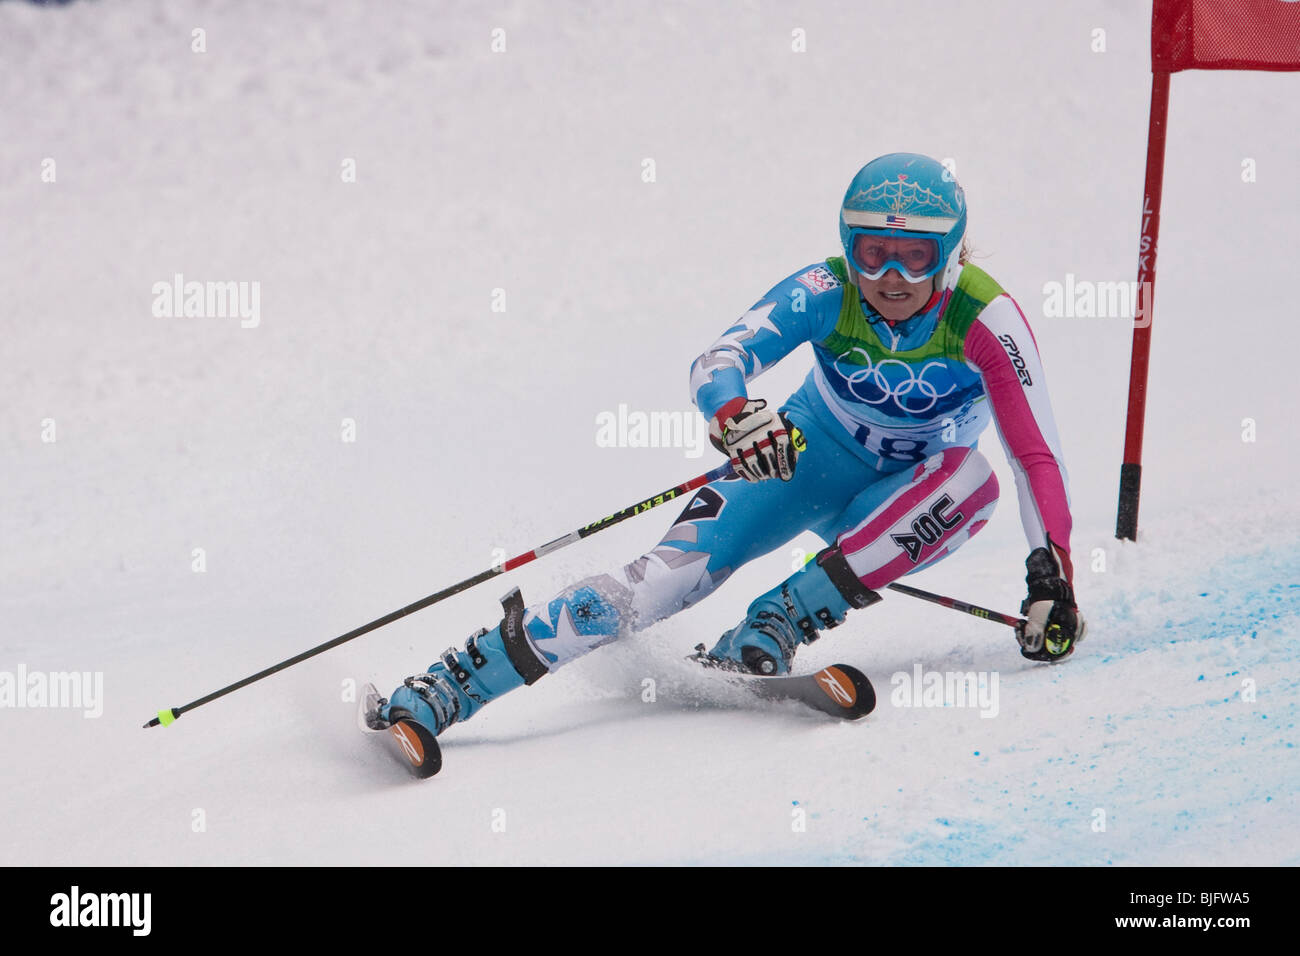 Julia Mancuso (USA) competing in the Alpine Skiing Women's Giant Slalom event at the 2010 Olympic Winter Games Stock Photo